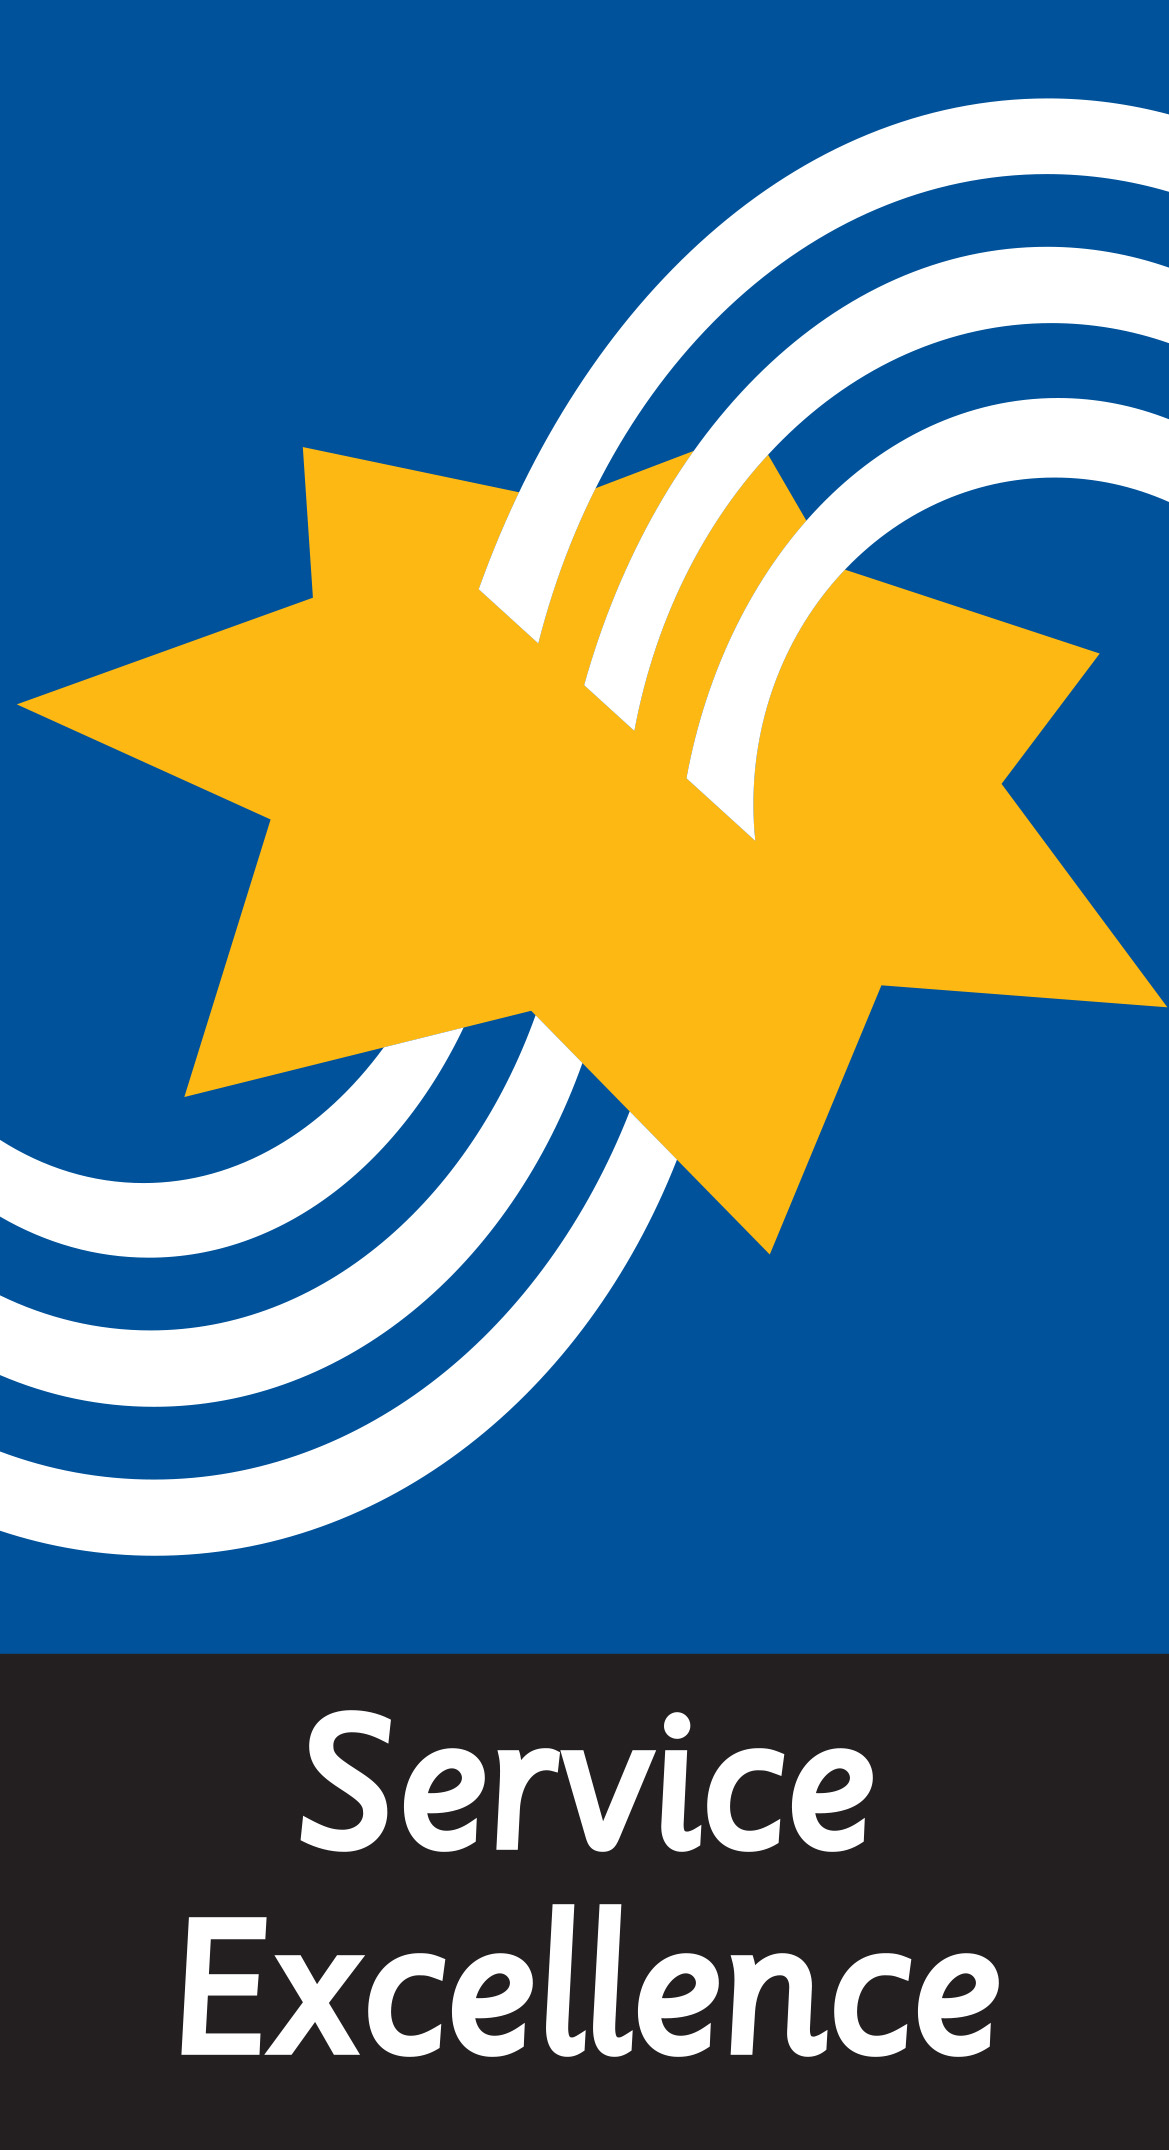 Gold seven-pointed star, pierced by three wavy white lines, on a deep blue background.